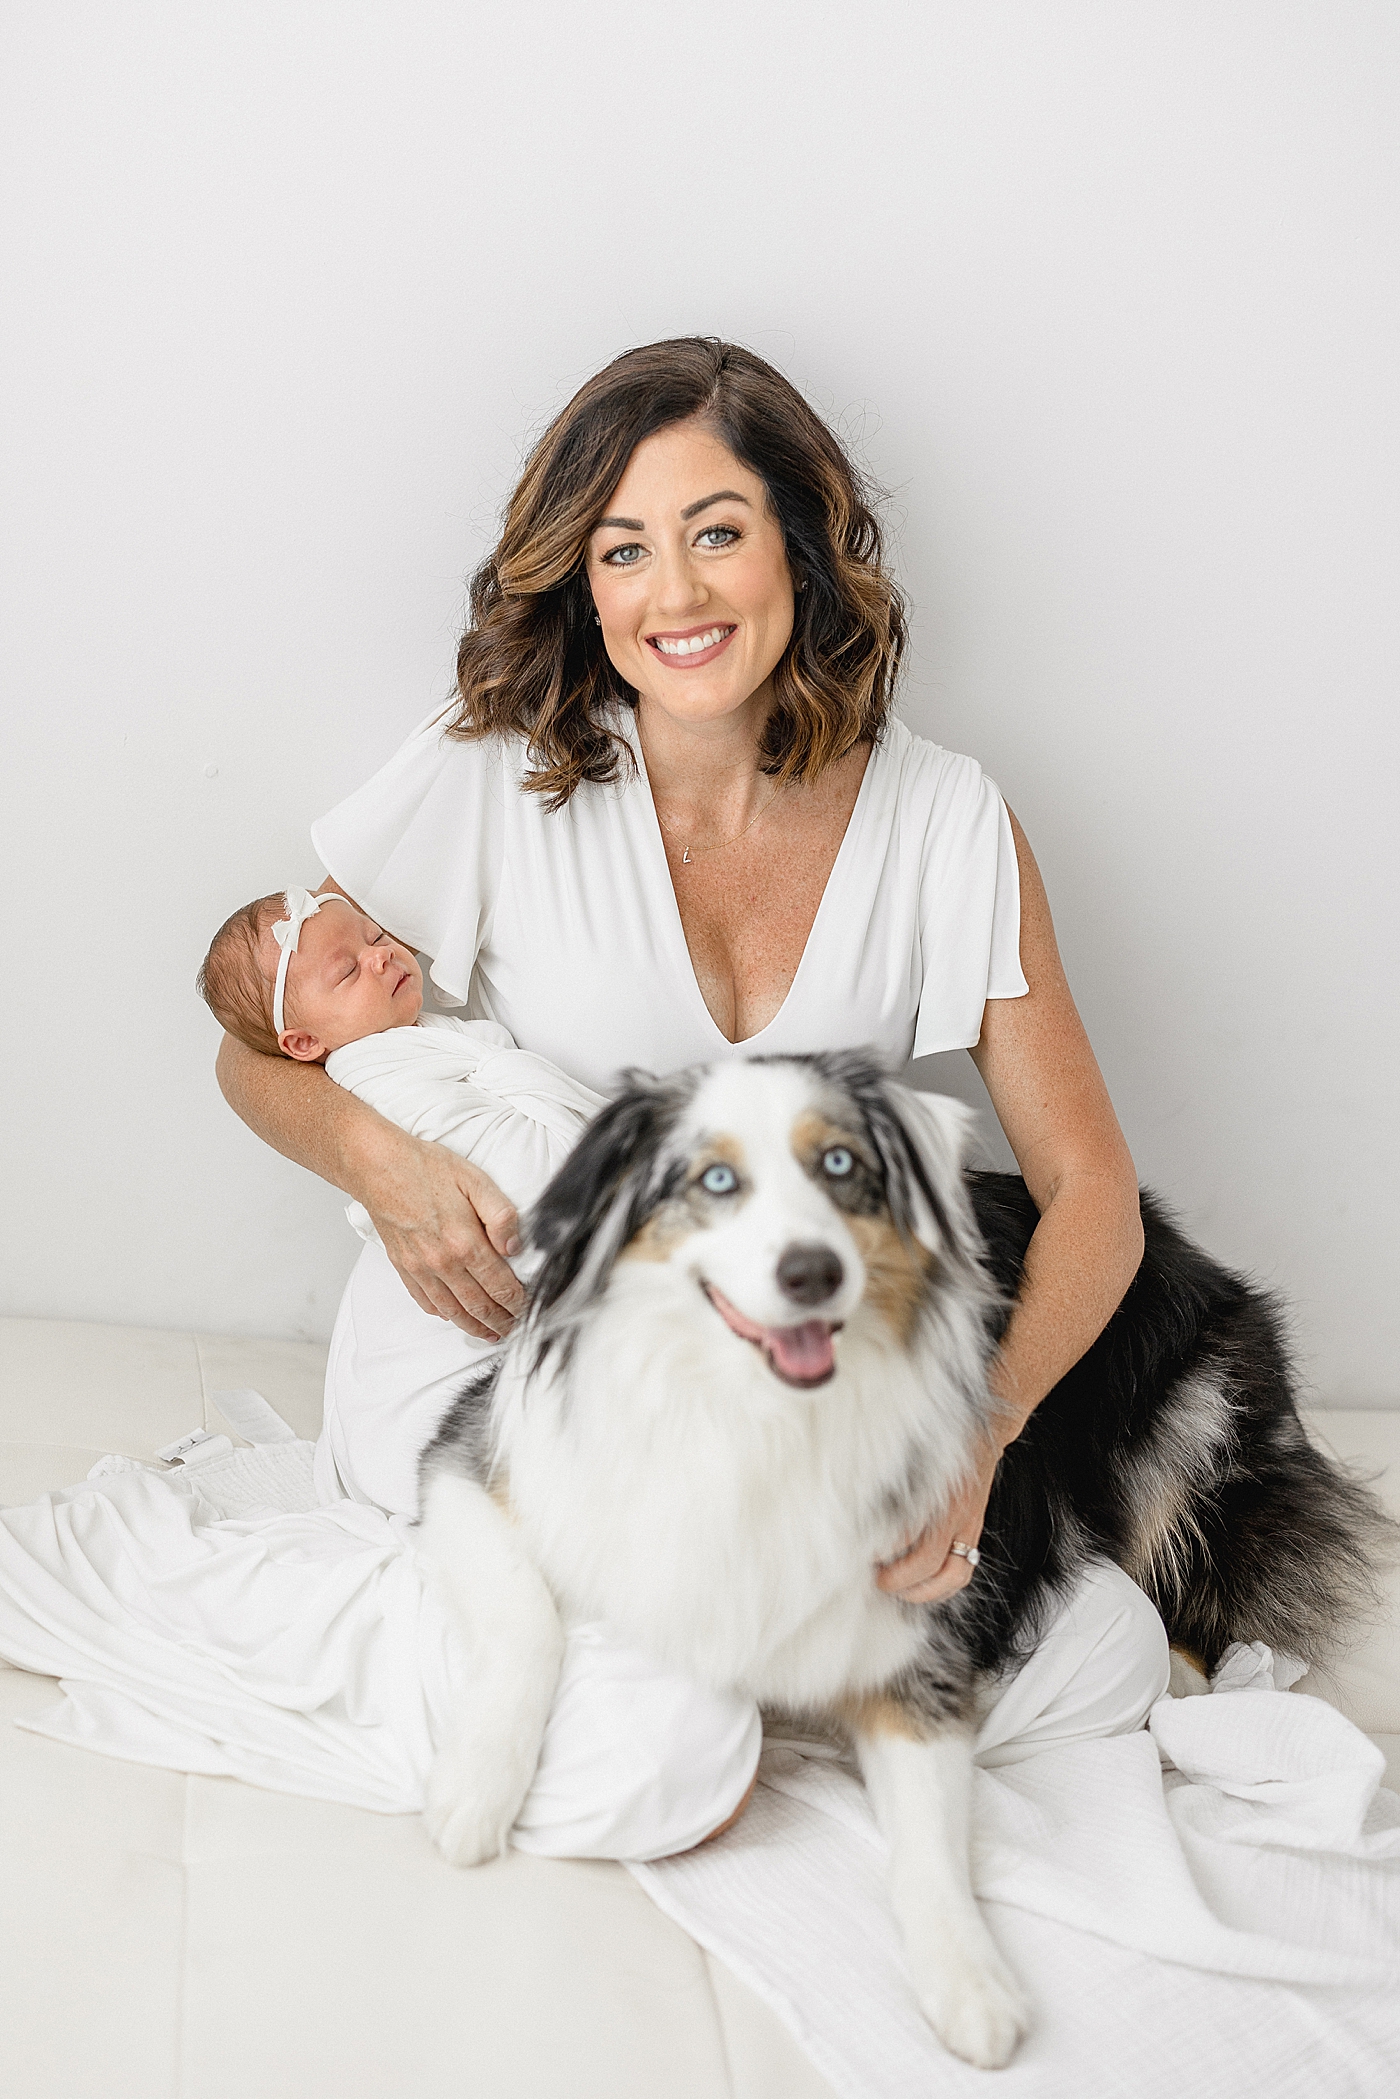 Newborn session with pets in the studio. Photo by Brittany Elise Photography.